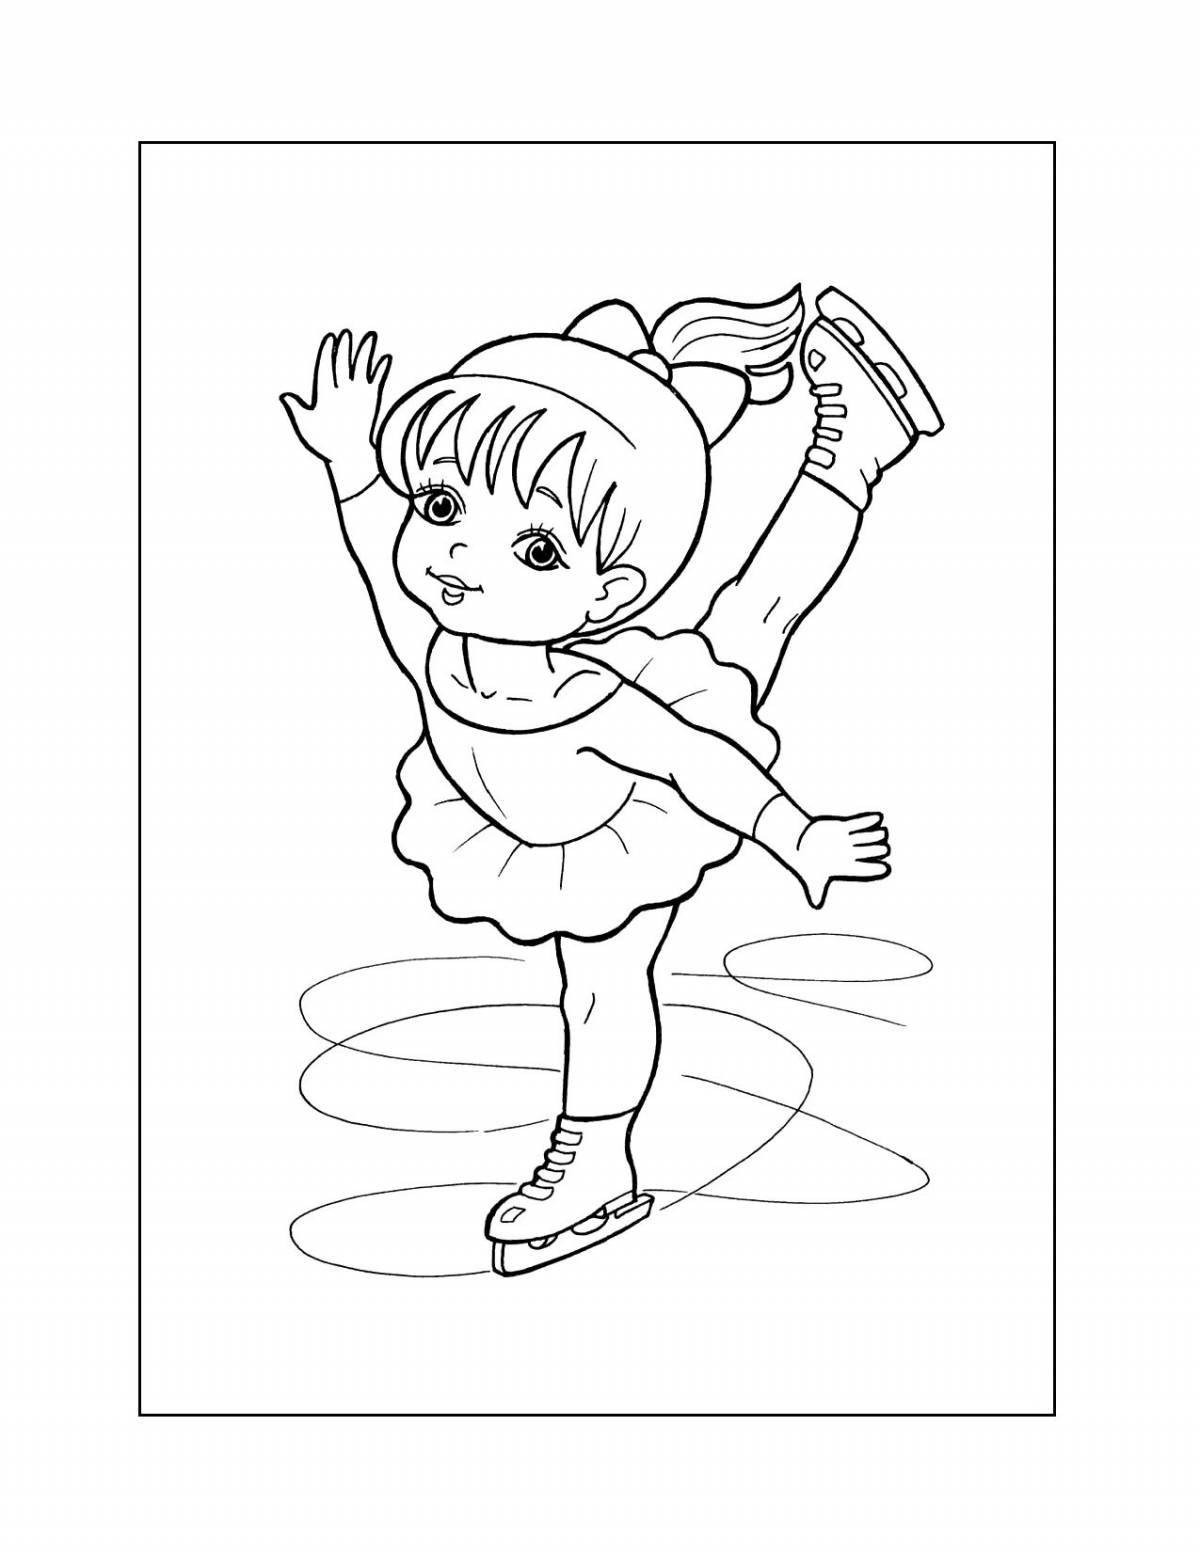 Bright health coloring page